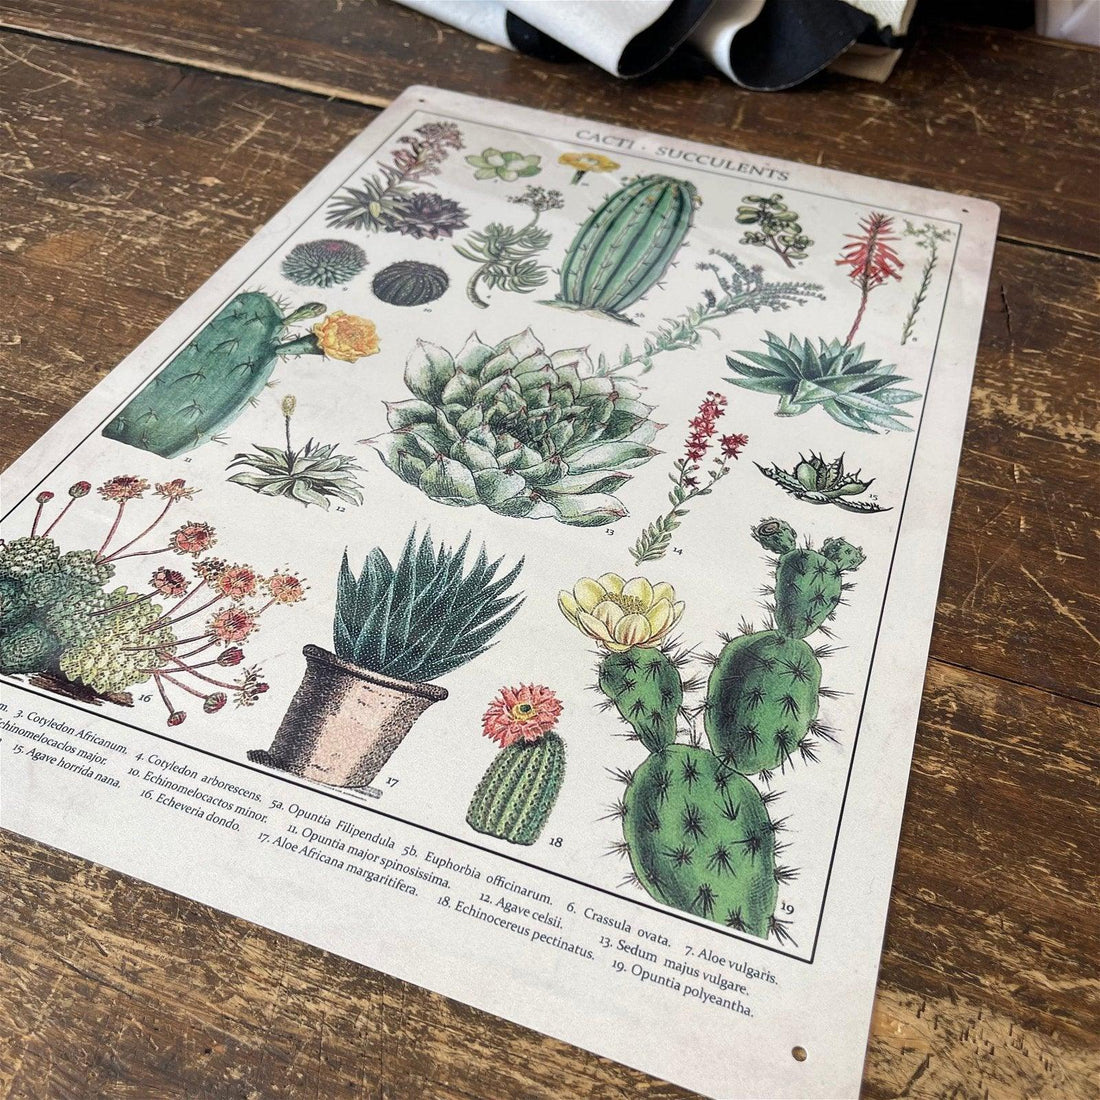 Vintage Metal Sign - Retro Cacti & Succulents Identification Picture - £27.99 - Signs & Rules 